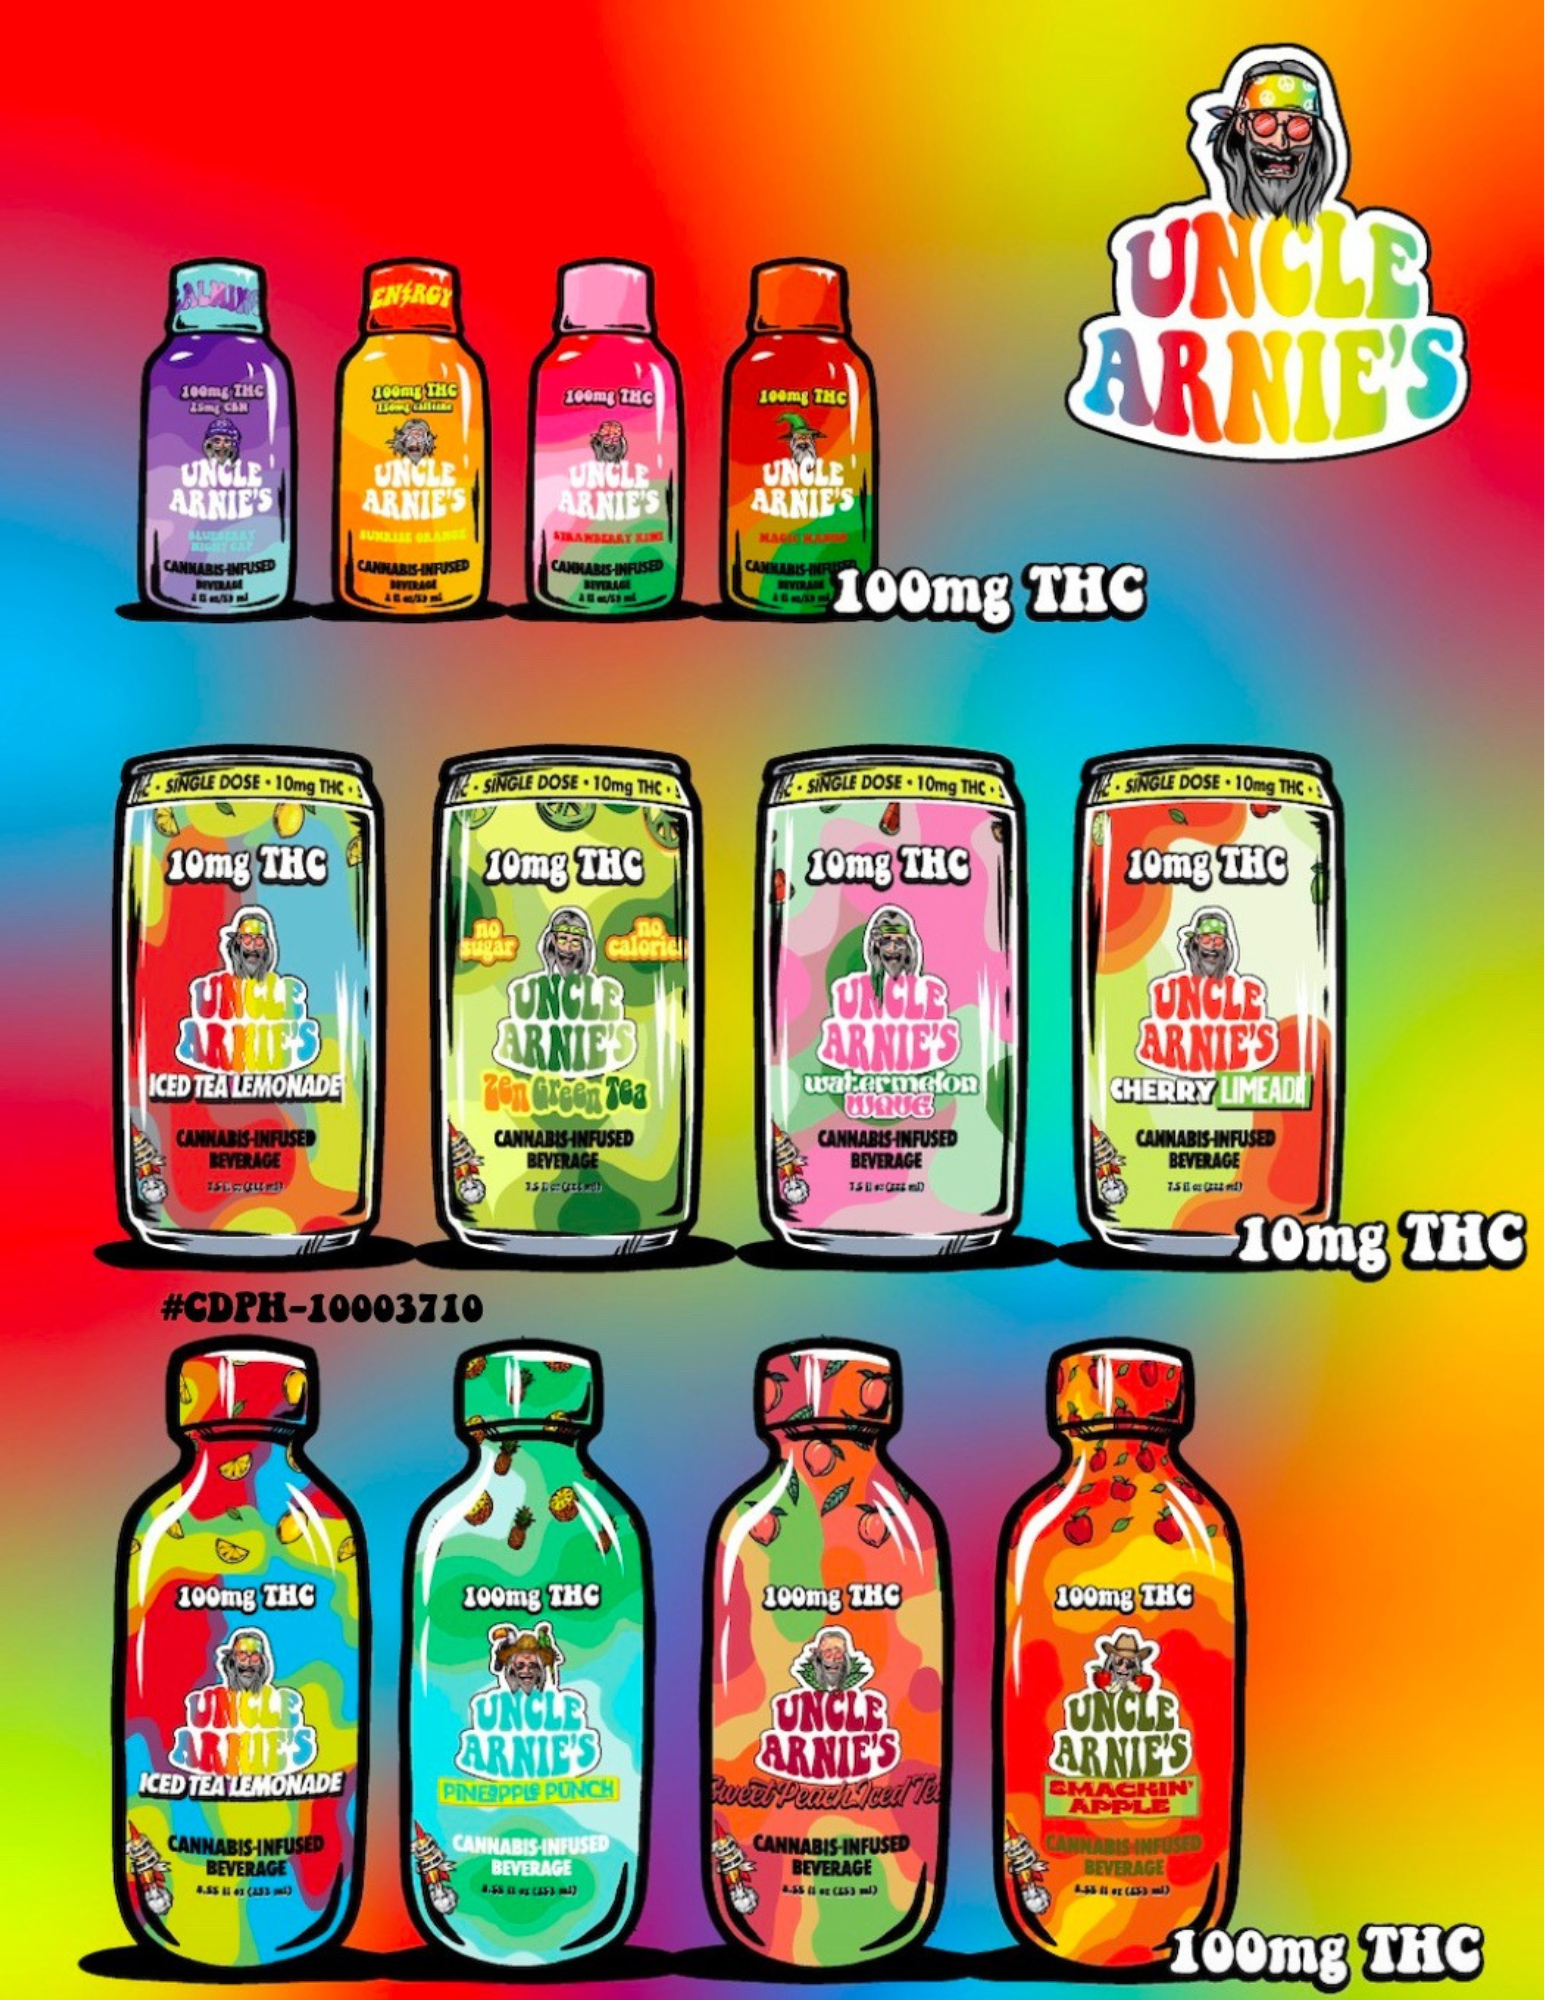 Perfect Union product spotlight on Uncle Arnies: Shop the refreshing beverage and top flavor iced lemonade at a Perfect Union near you